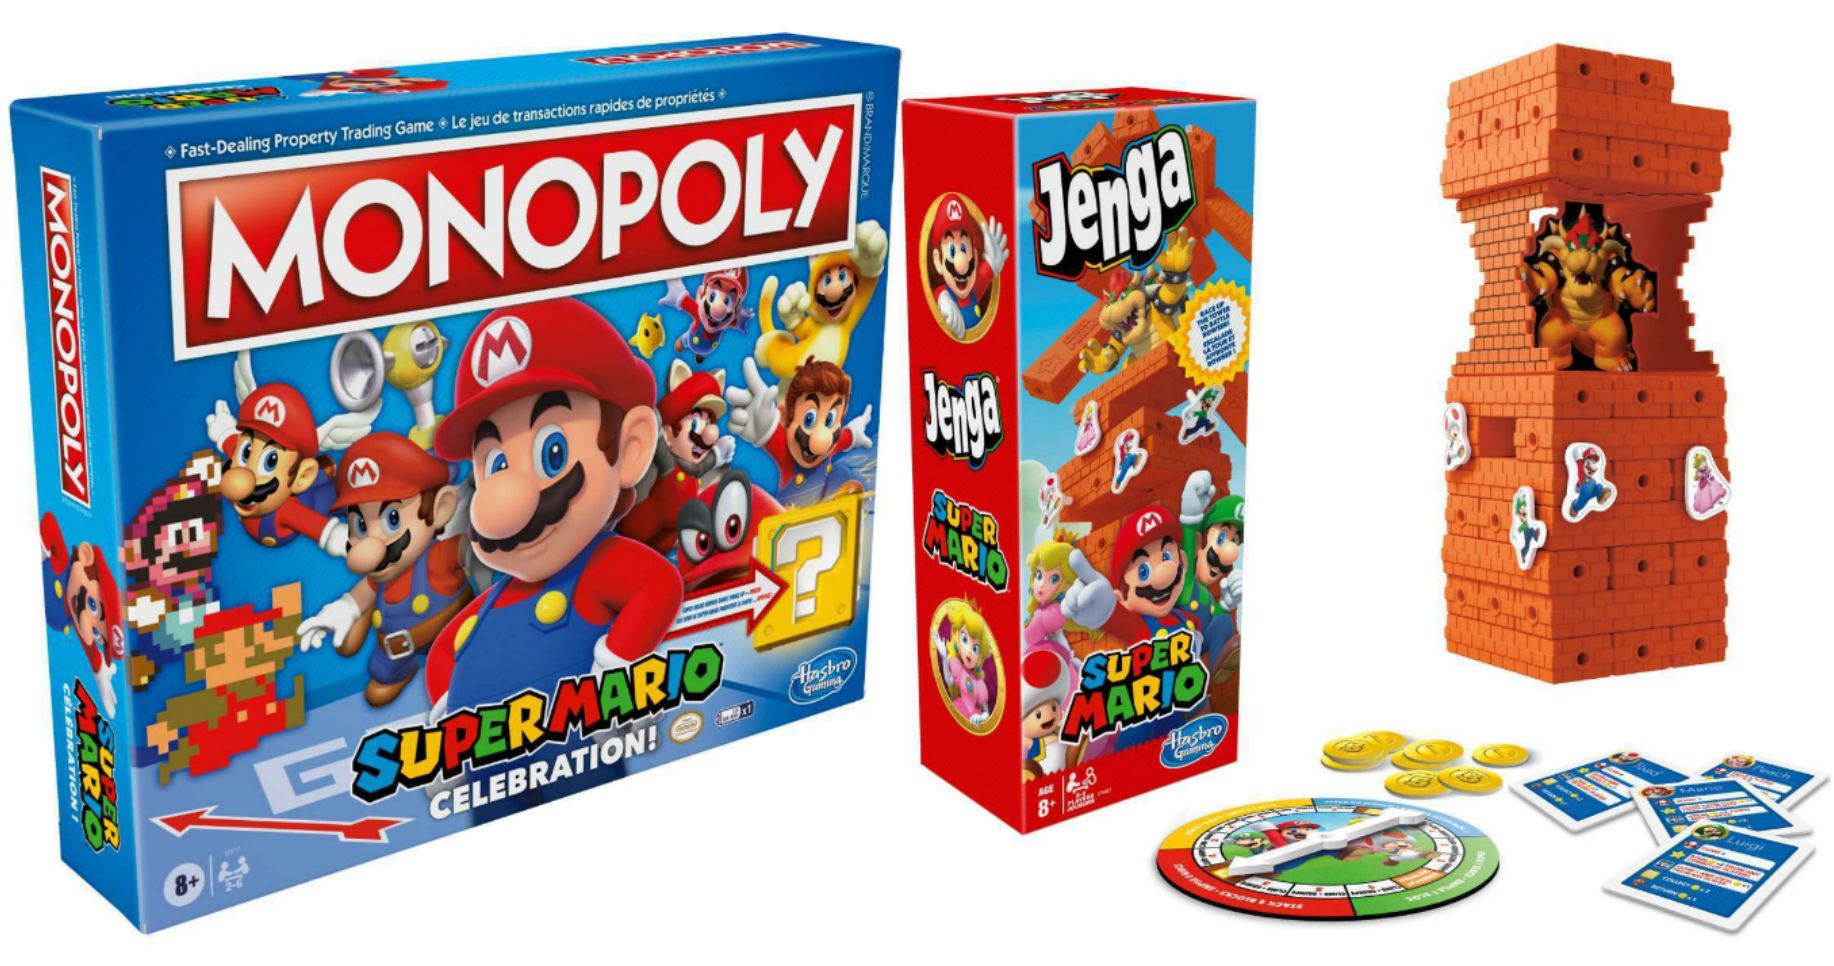 Super Mario Celebrates 35th Anniversary with New Monopoly and Jenga Games